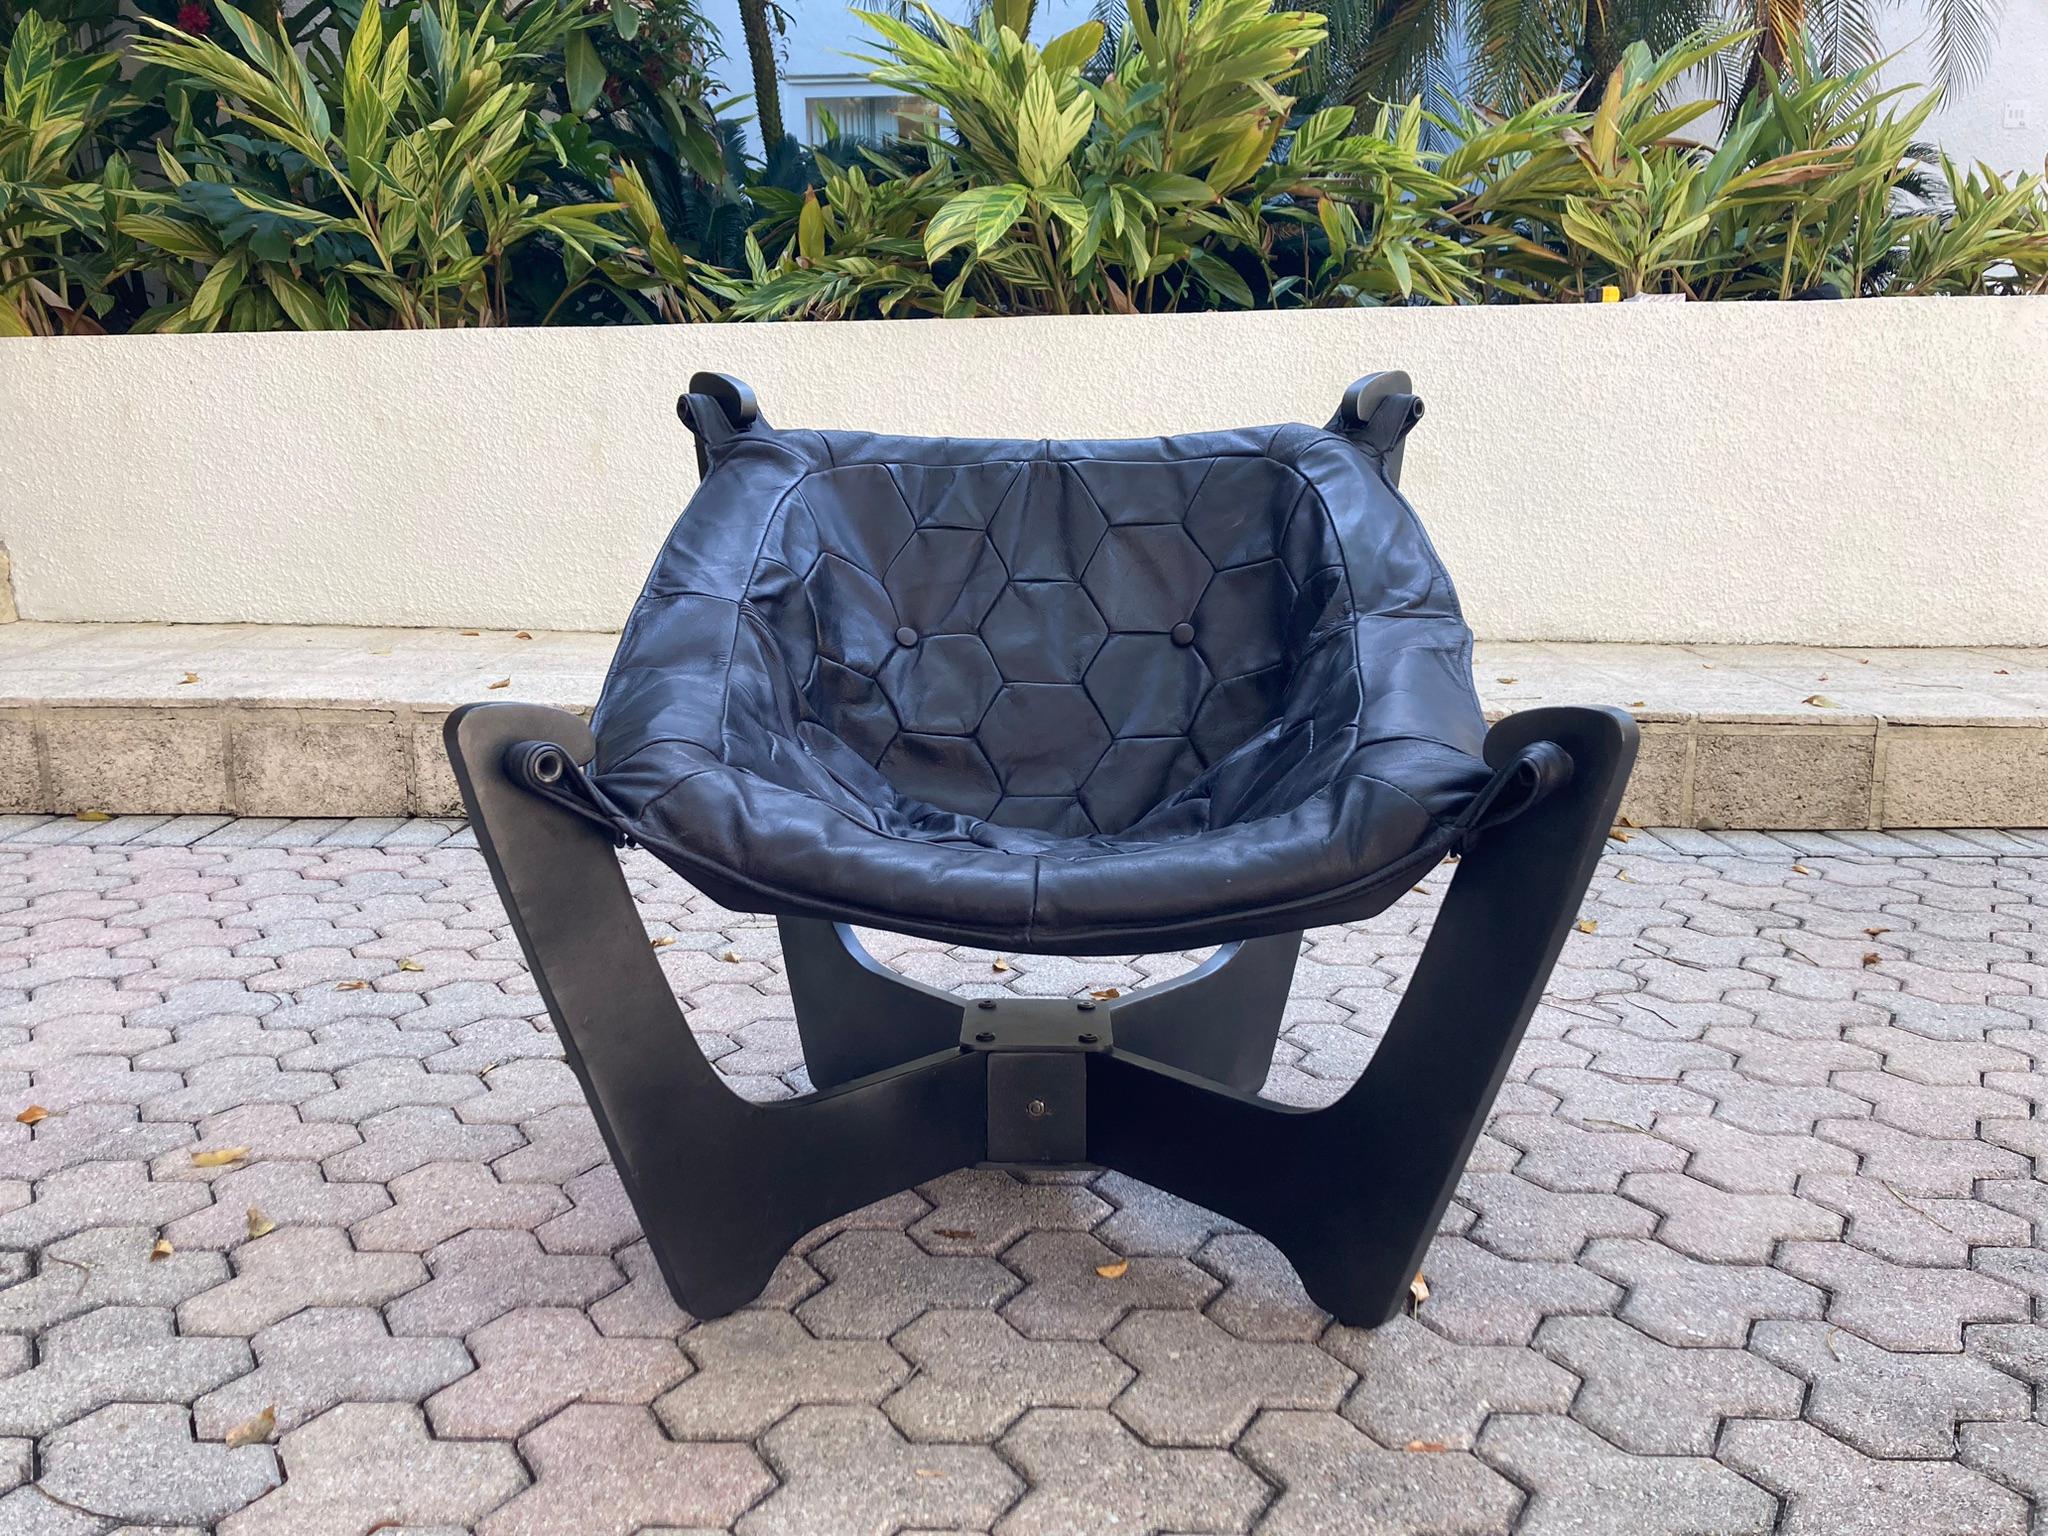 Luna Lounge Chair by Odd Knutsen in black leather. Ready for a new home.